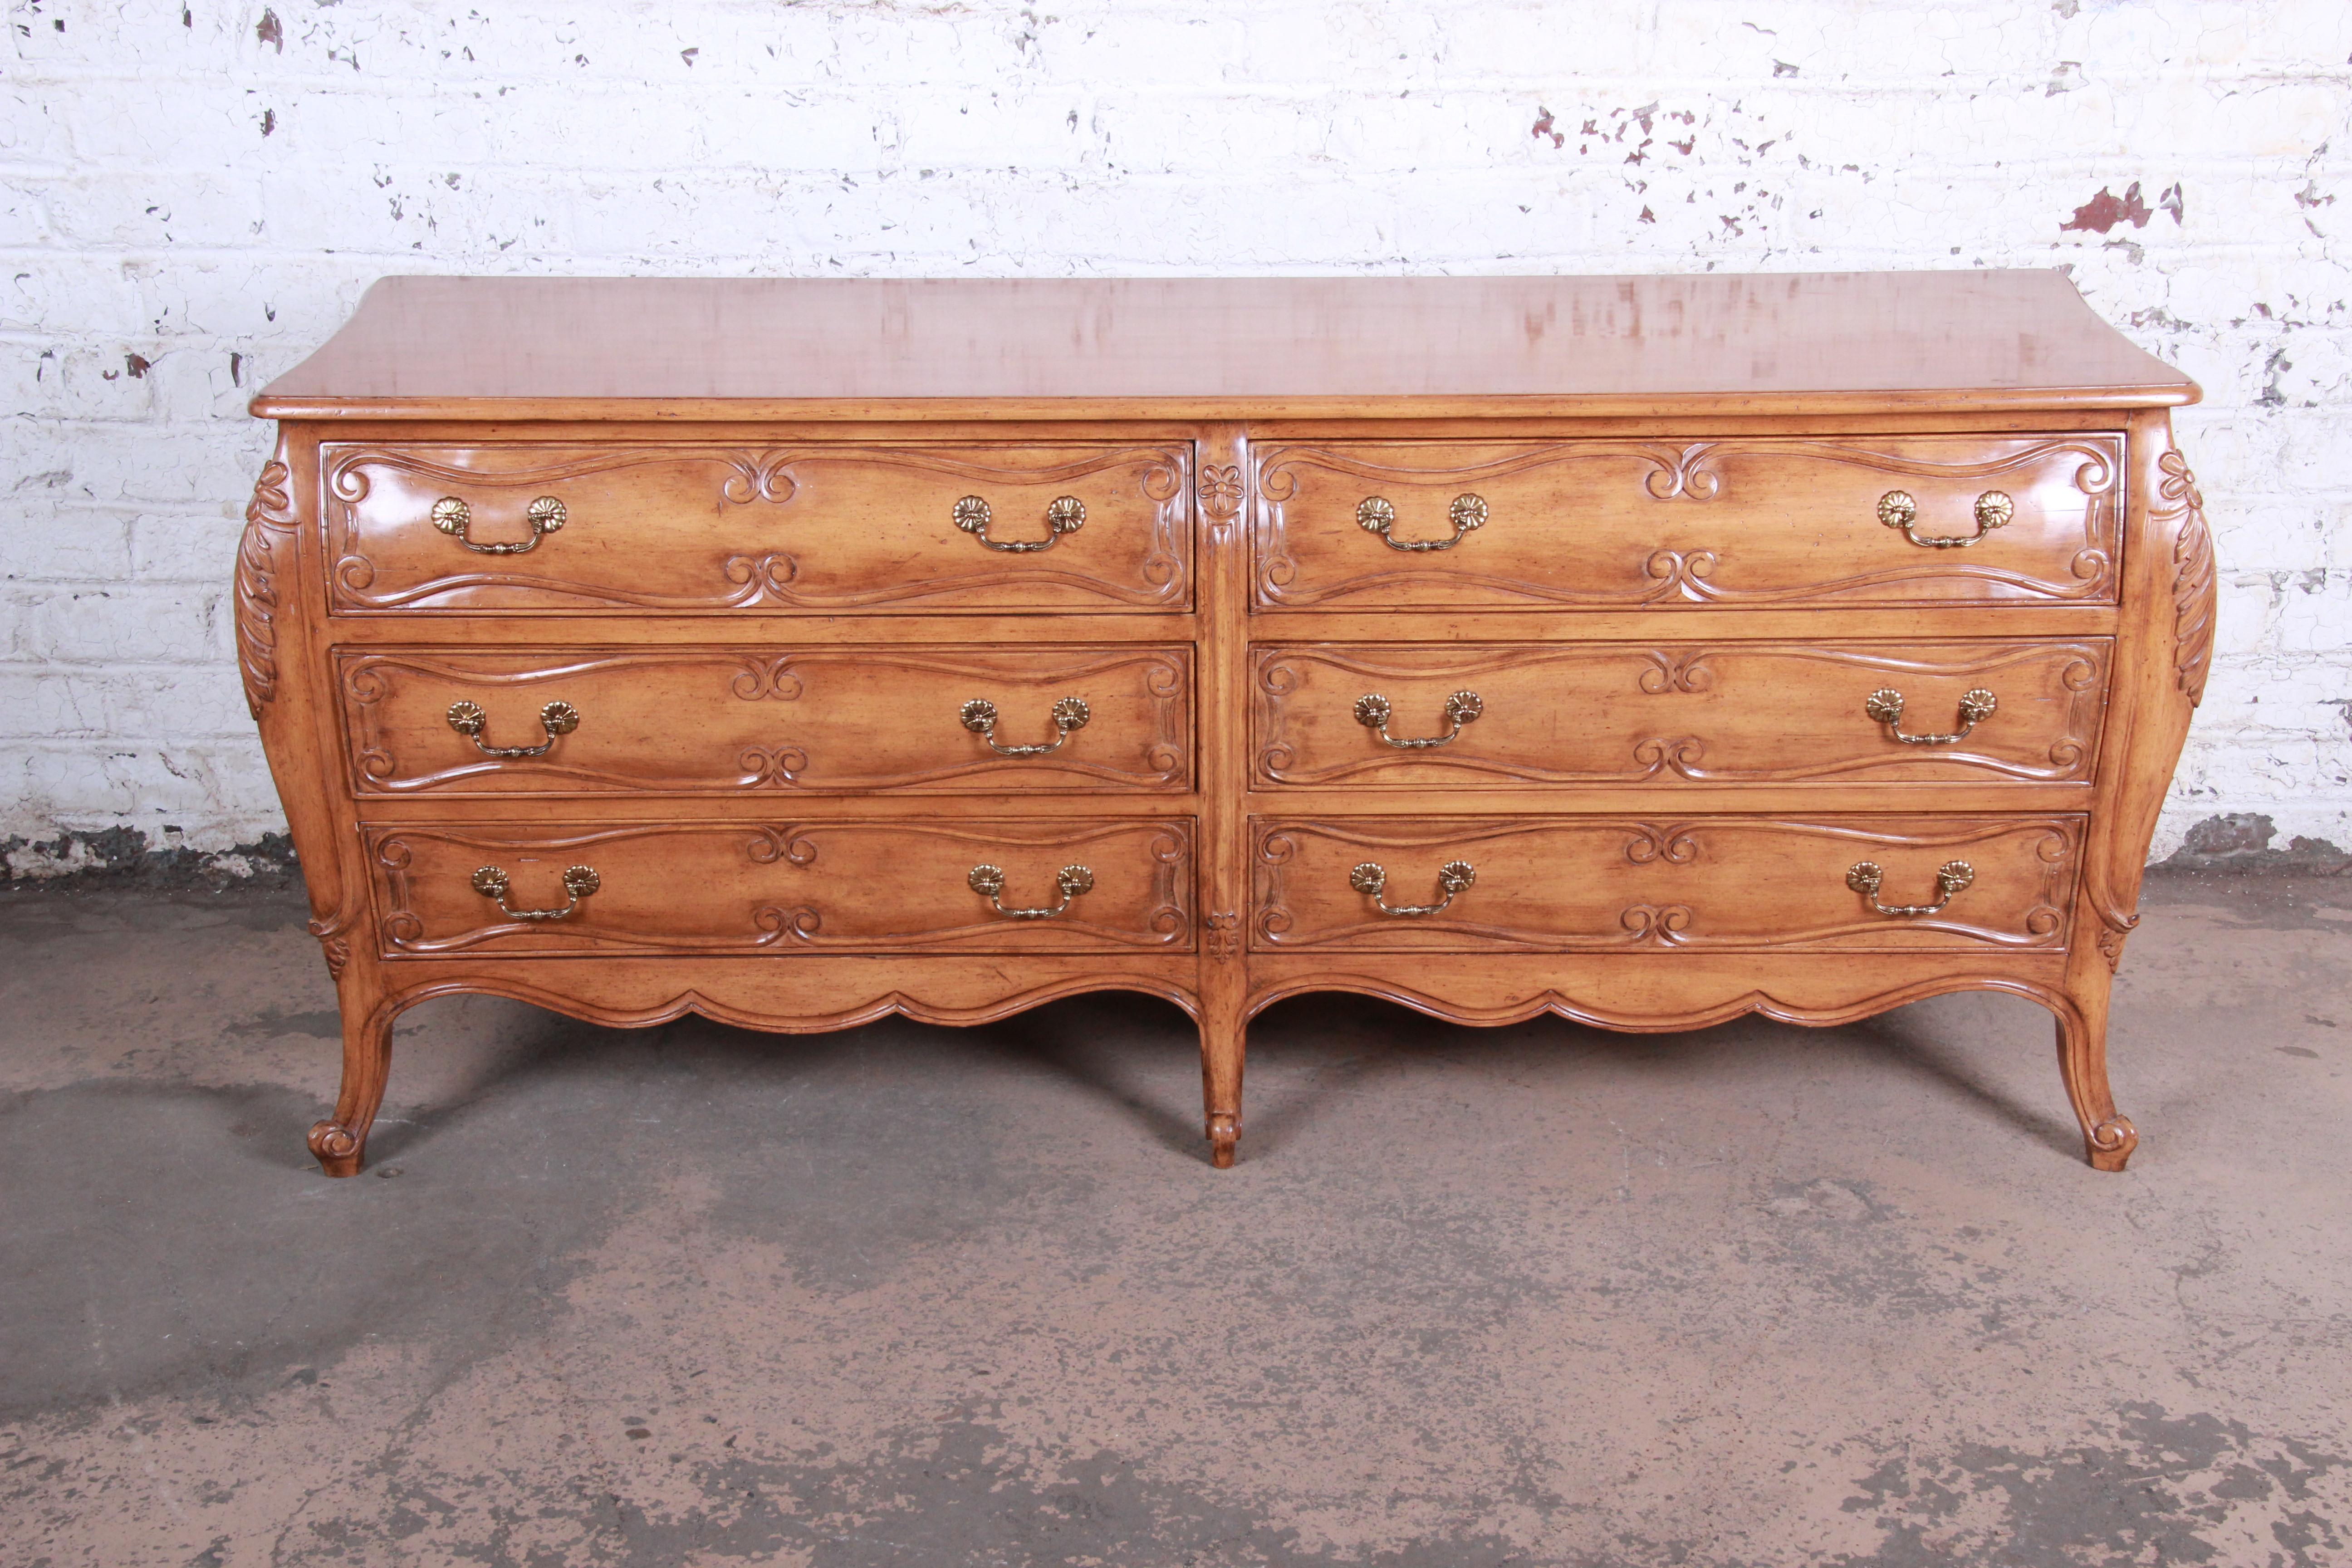 A gorgeous French Provincial Louis XV style carved fruitwood double dresser. The dresser features beautiful wood grain, with nice carved wood details and cabriole legs. It offers ample storage, with six drawers. Hardware is original. The dresser is